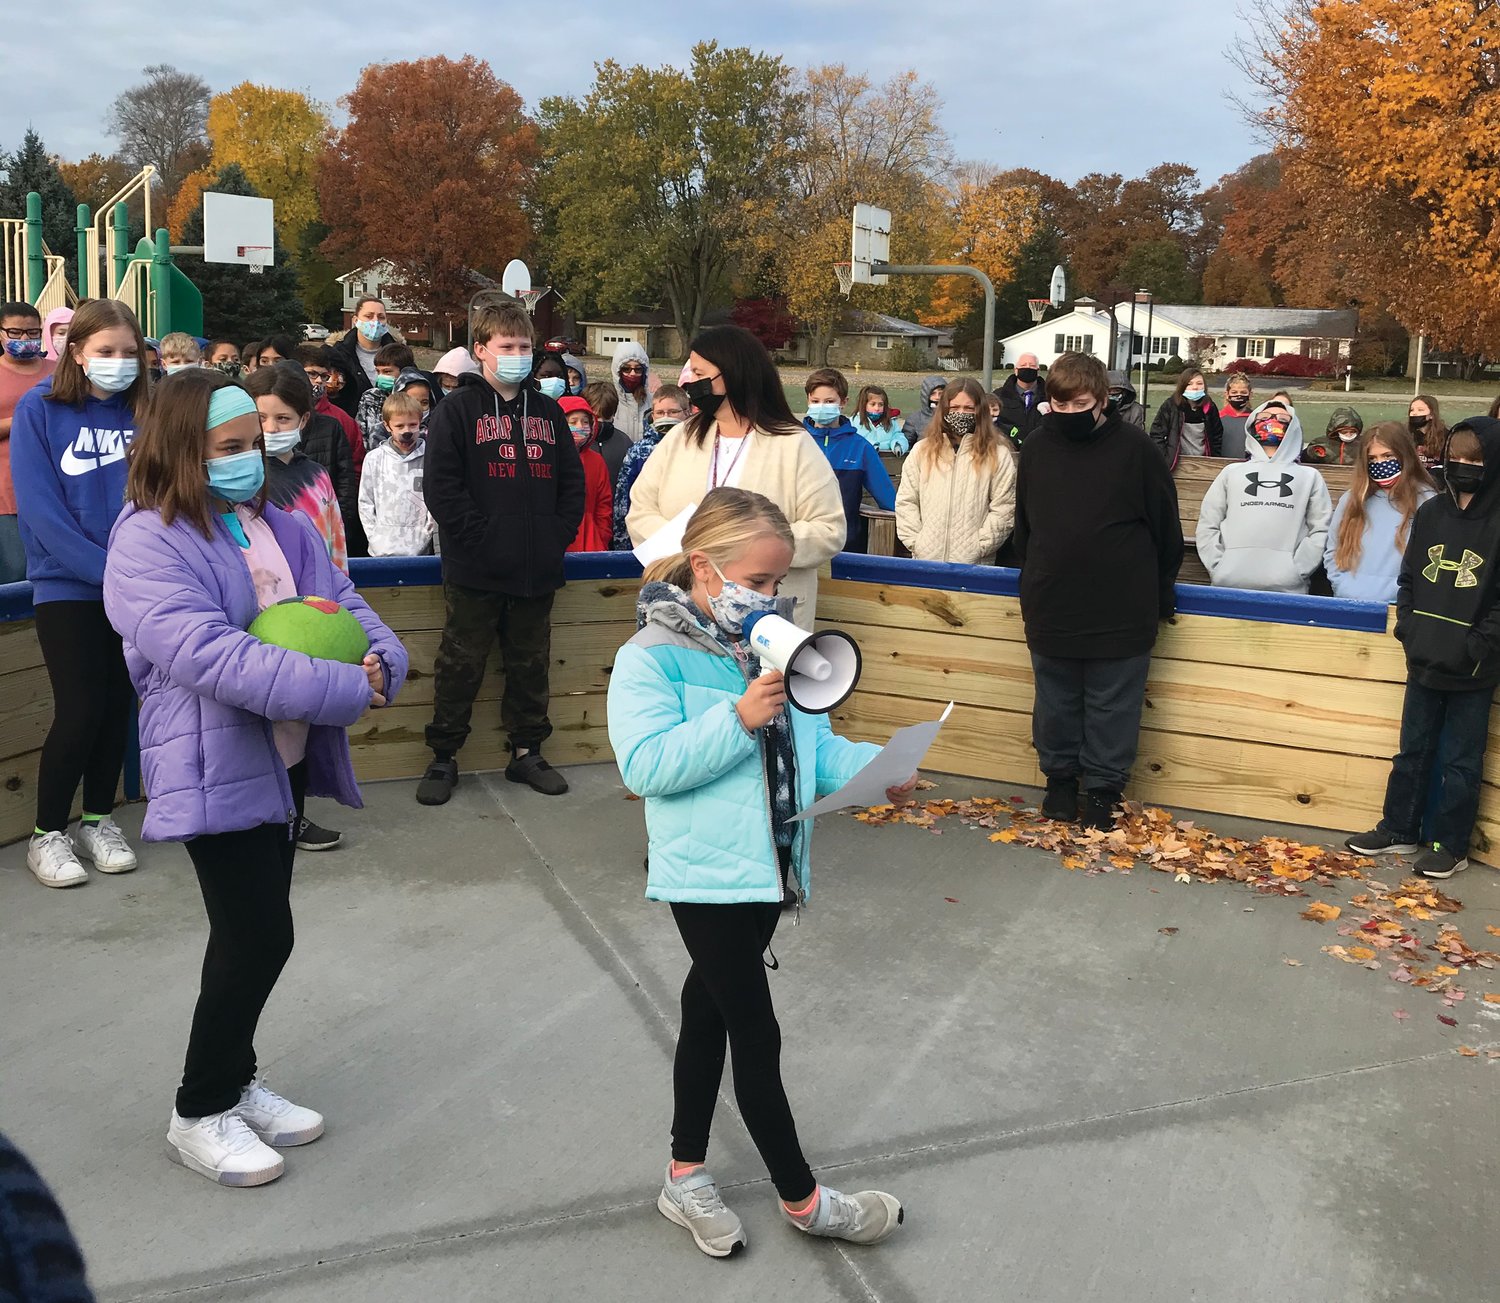 On Monday, the Hoover Elementary Student Council hosted a dedication ceremony for the newly added handicapped accessible Gaga pit to the school playground. Gaga is known as a gentler version of softball and combines the skills of dodging, striking, running and jumping, while trying to hit opponents below the knees with a ball. Student Council President Maddie Biddle (holding megaphone) gave a short speech thanking fundraiser supporters, parents, staff and Kettlehut Construction for all of their combined time and financial support of the project. After the dedication speech, Hoover Student Council representatives were tasked with playing the first official game.